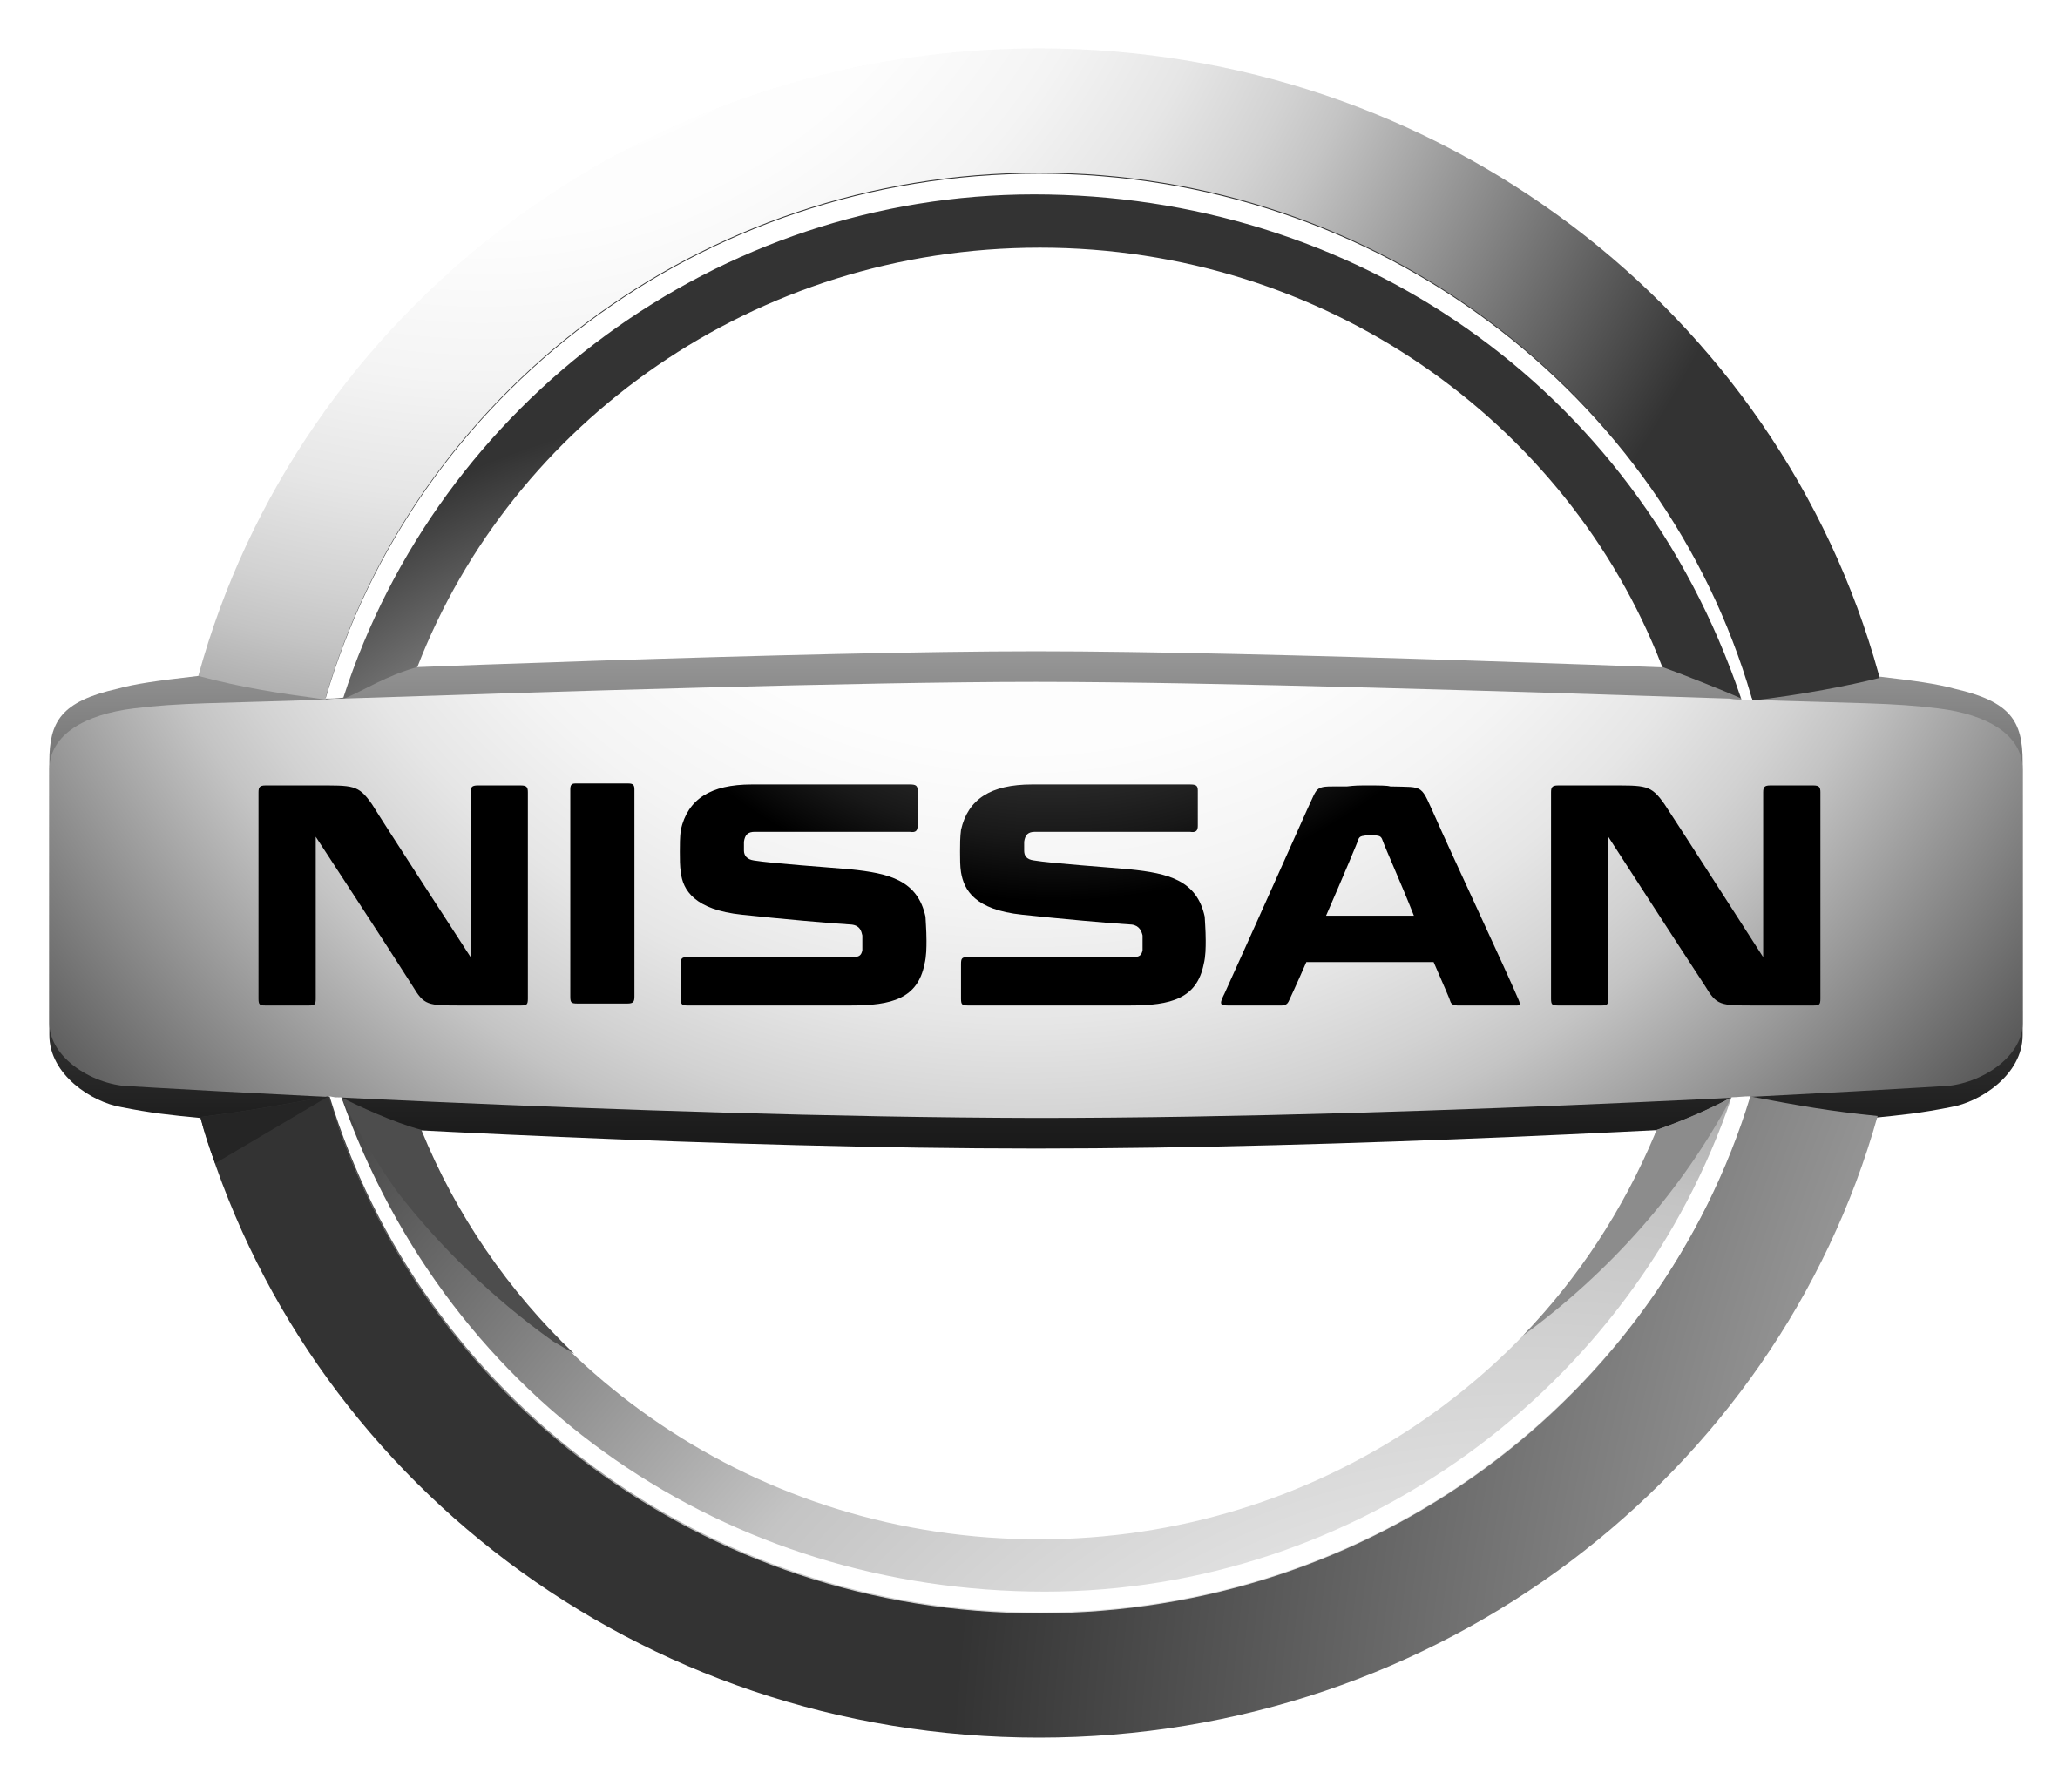 Read more about: Nissan